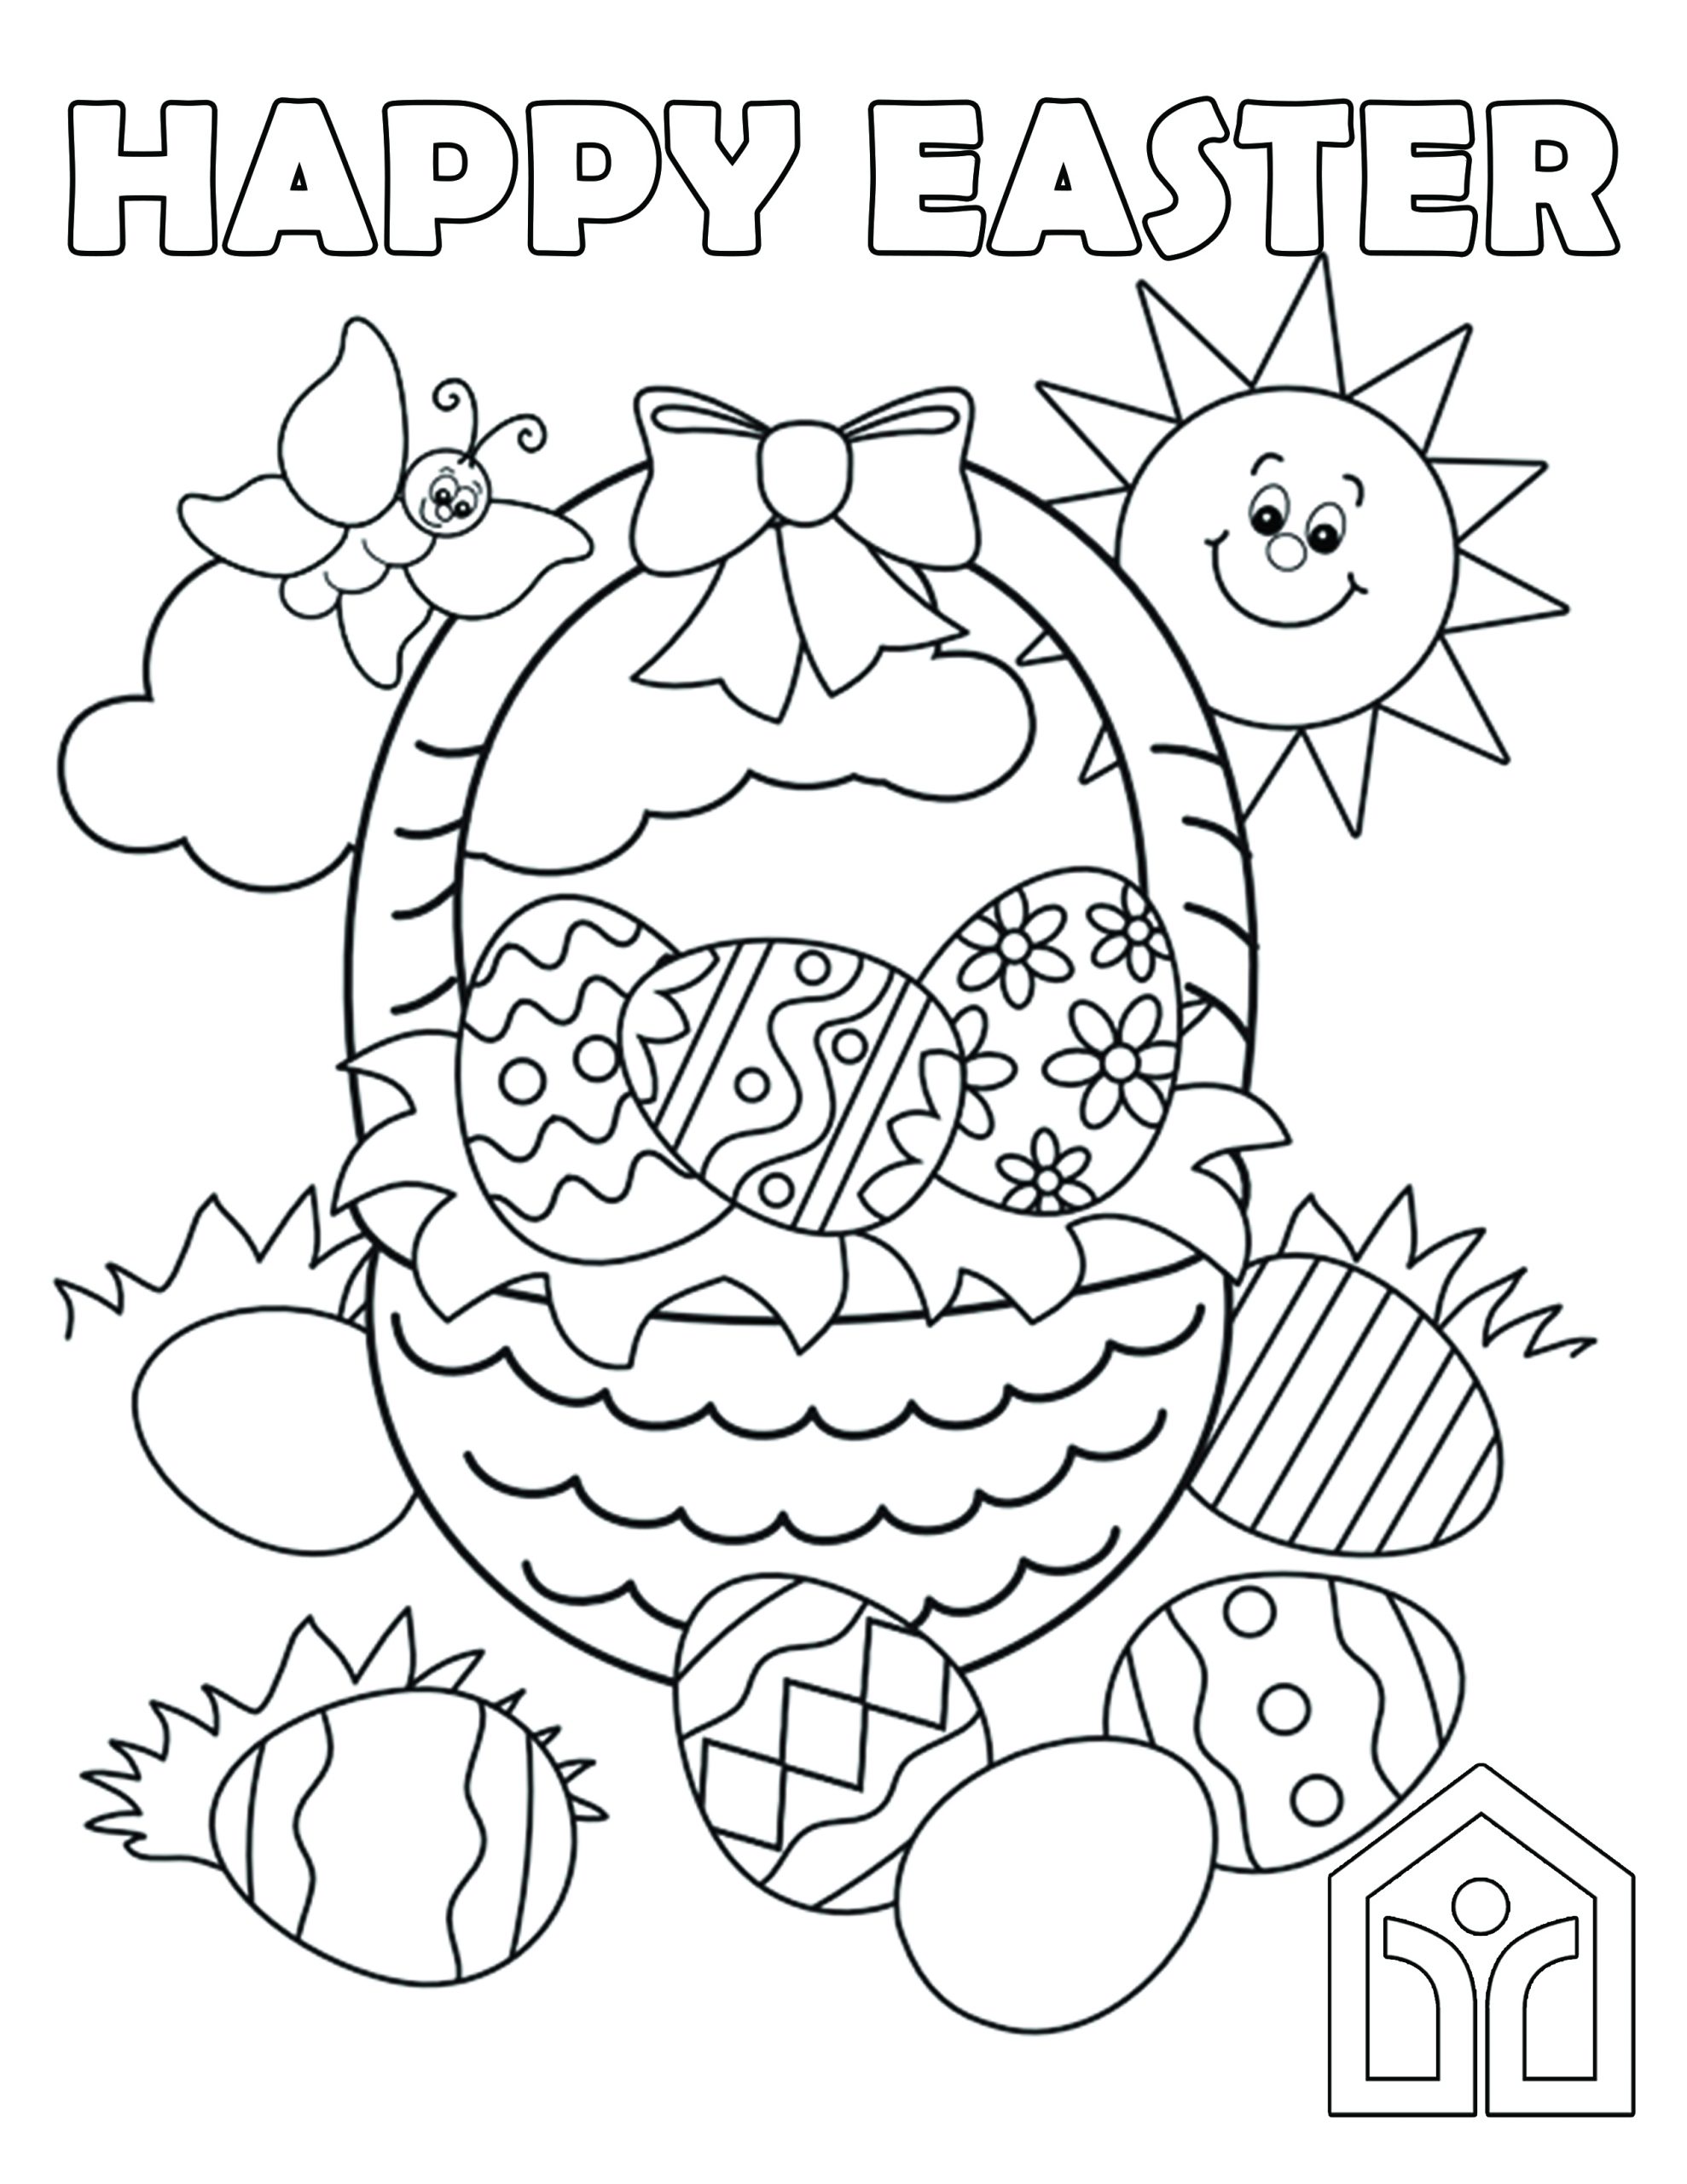 Easter Coloring Contest 2020 